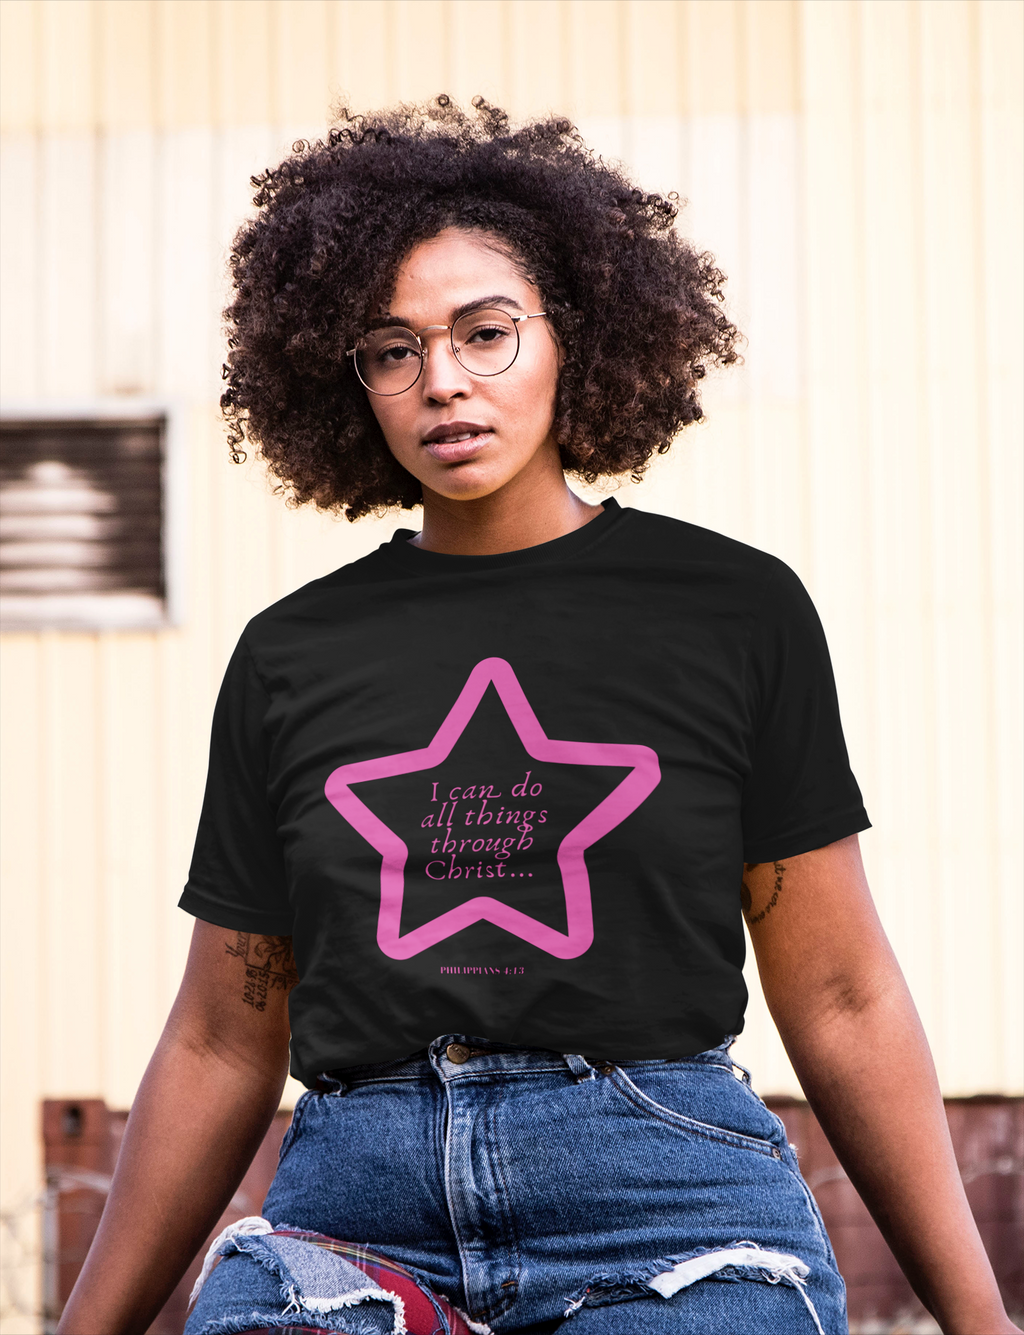 LIMITED EDITION "I Can Do All Things Through Christ..." Star Short-Sleeve Unisex T-Shirt - Praises 